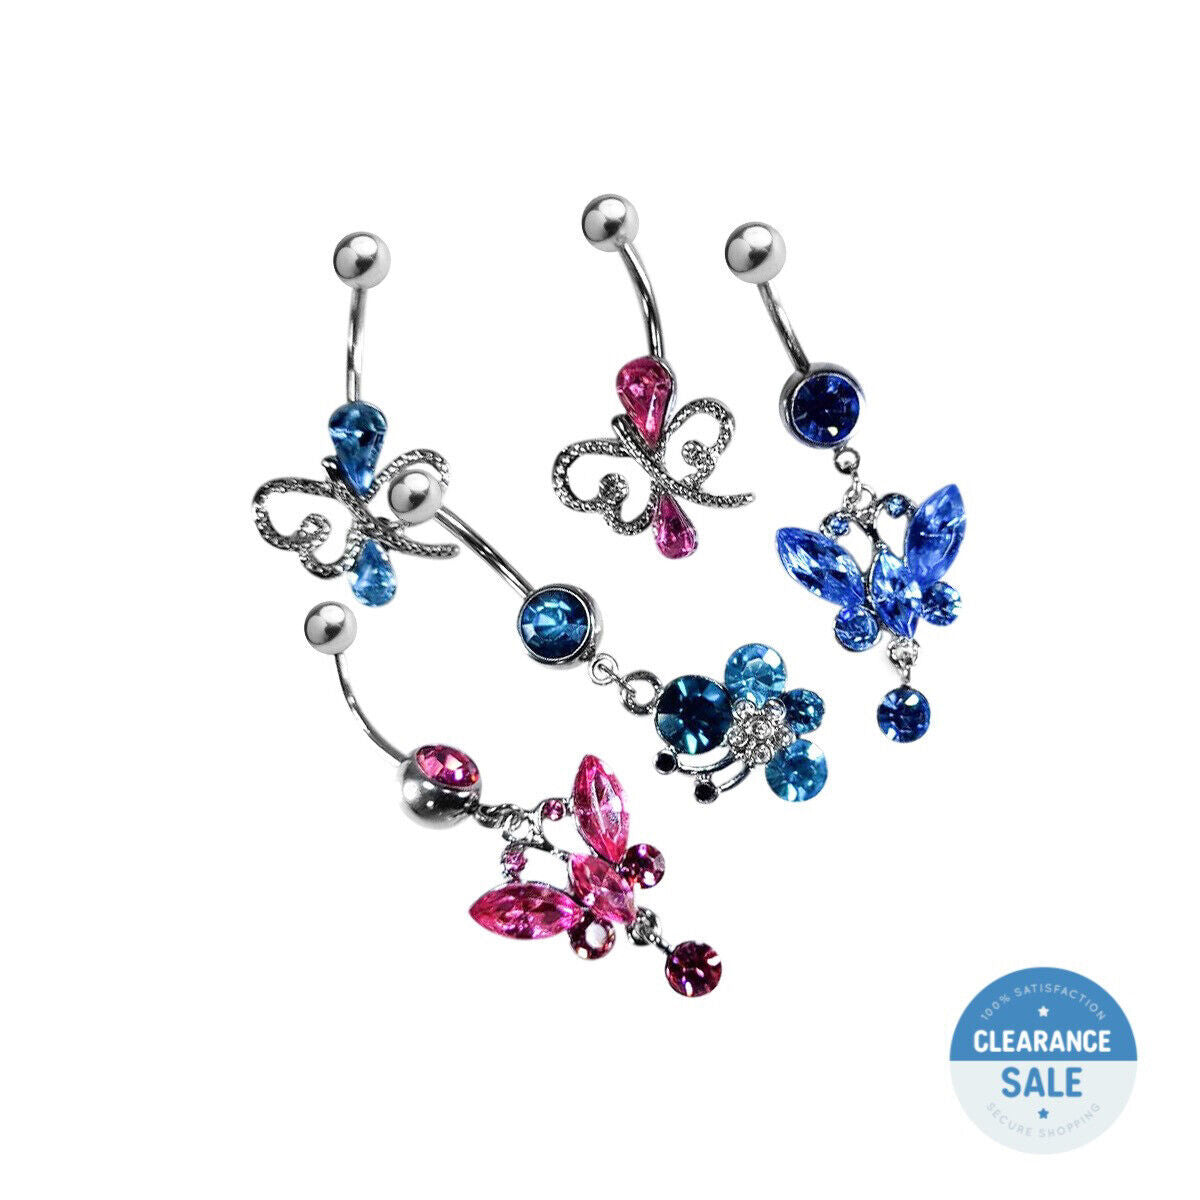 5 Pack of Fancy CZ Gem Belly Navel Ring Butterfly Design 14g Surgical Steel